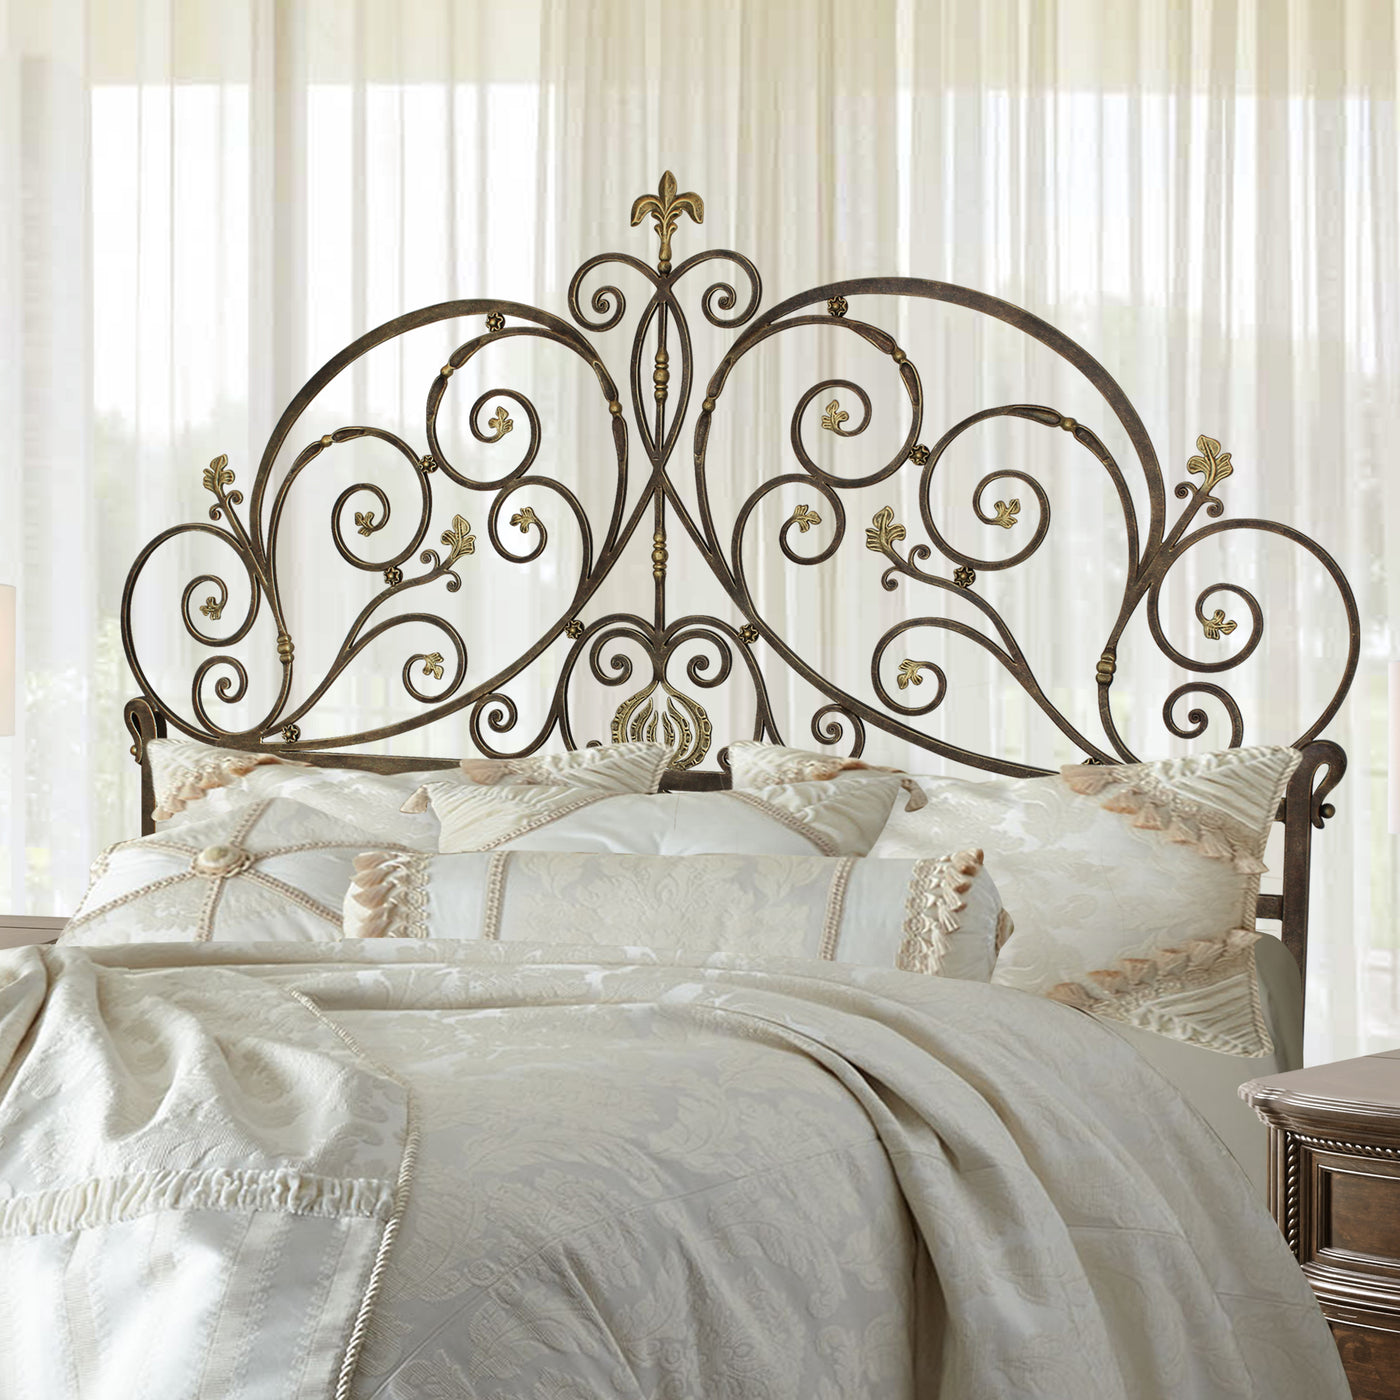 A luxurious wrought iron double bed inspired by Art Nouveau; with scrolls and leaves painted in an antique bronze finish